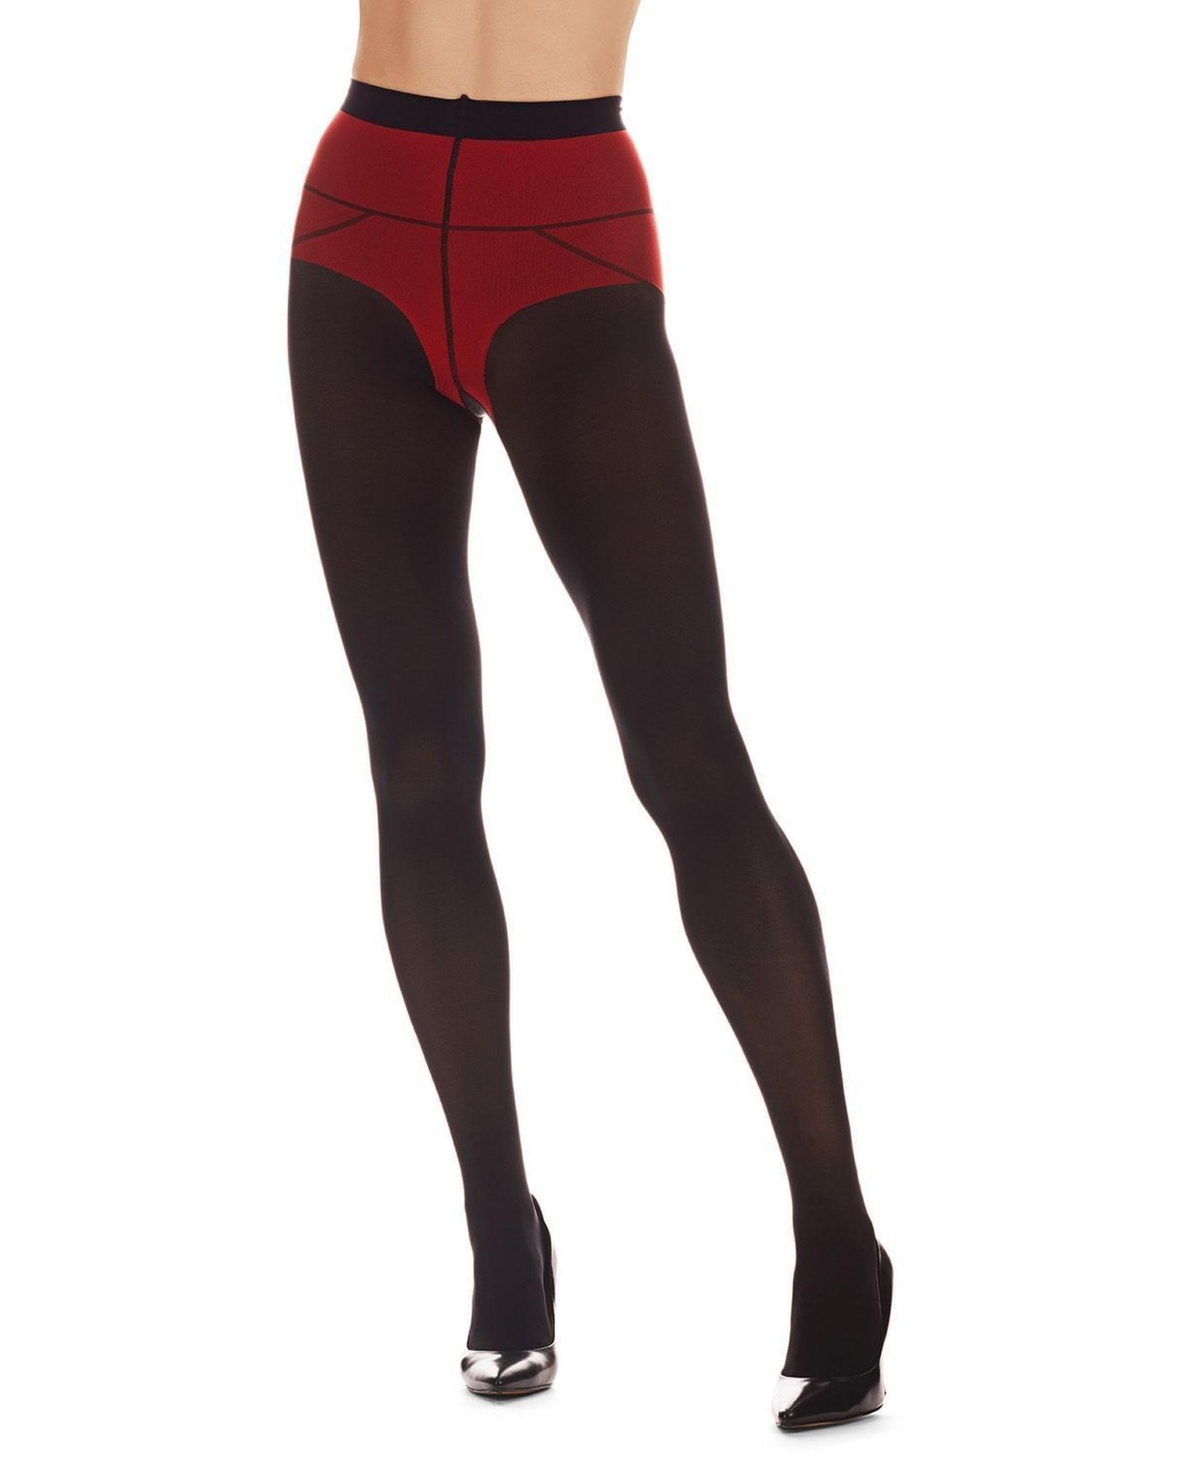 Women's Tie Me Up Opaque Tight Stockings - Black, Red